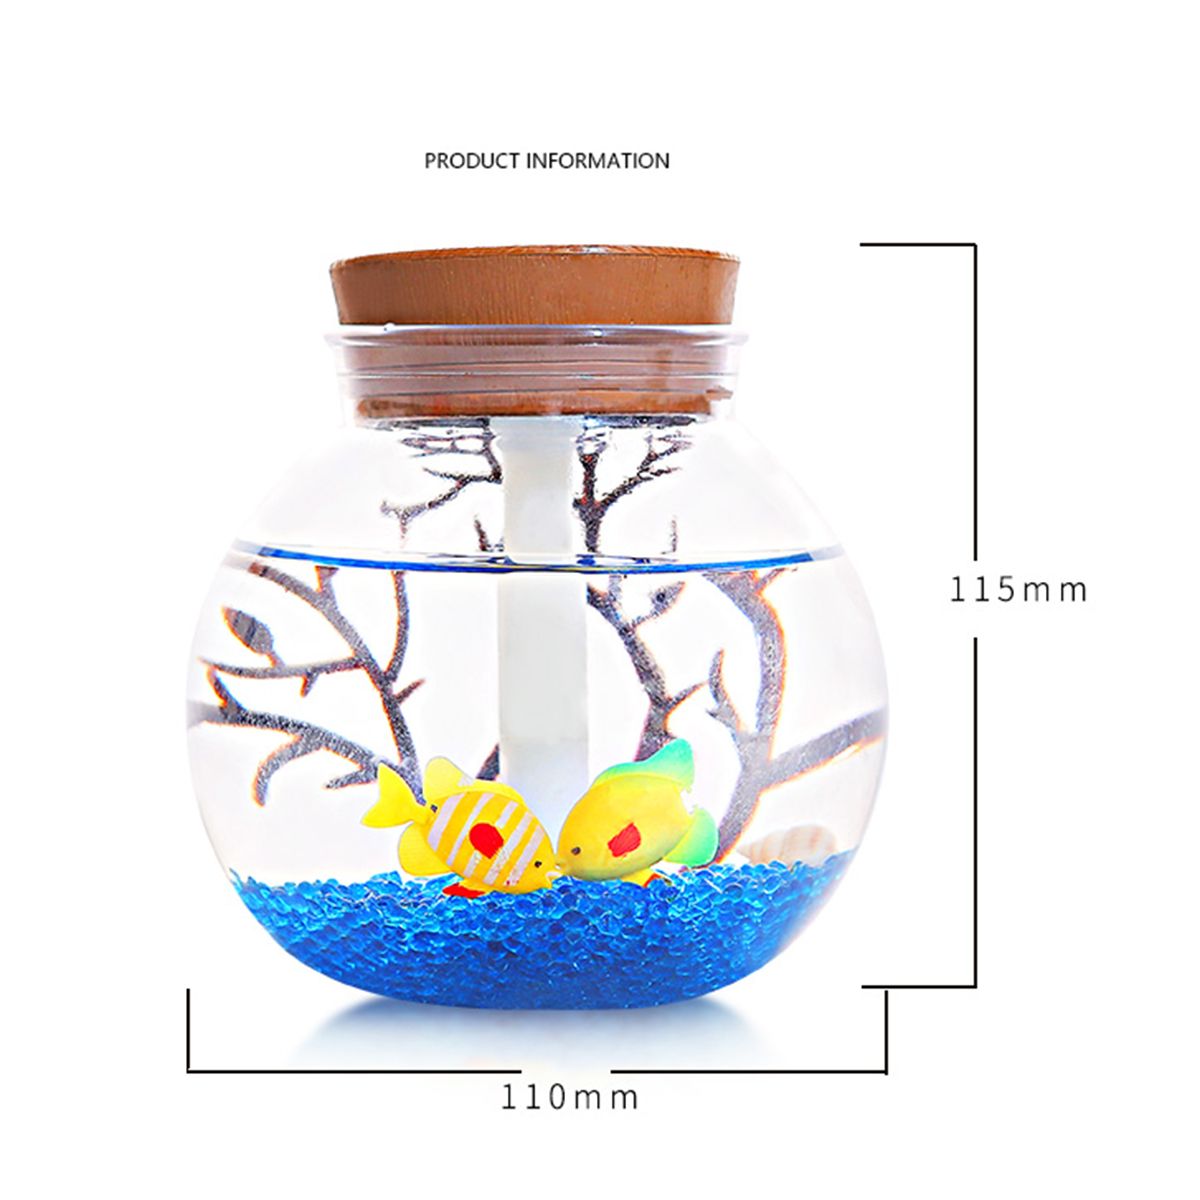 500ml-Micro-Landscape-Humidifier-USB-LED-Air-Diffuser-Aroma-Purifier-Atomizer-1473916